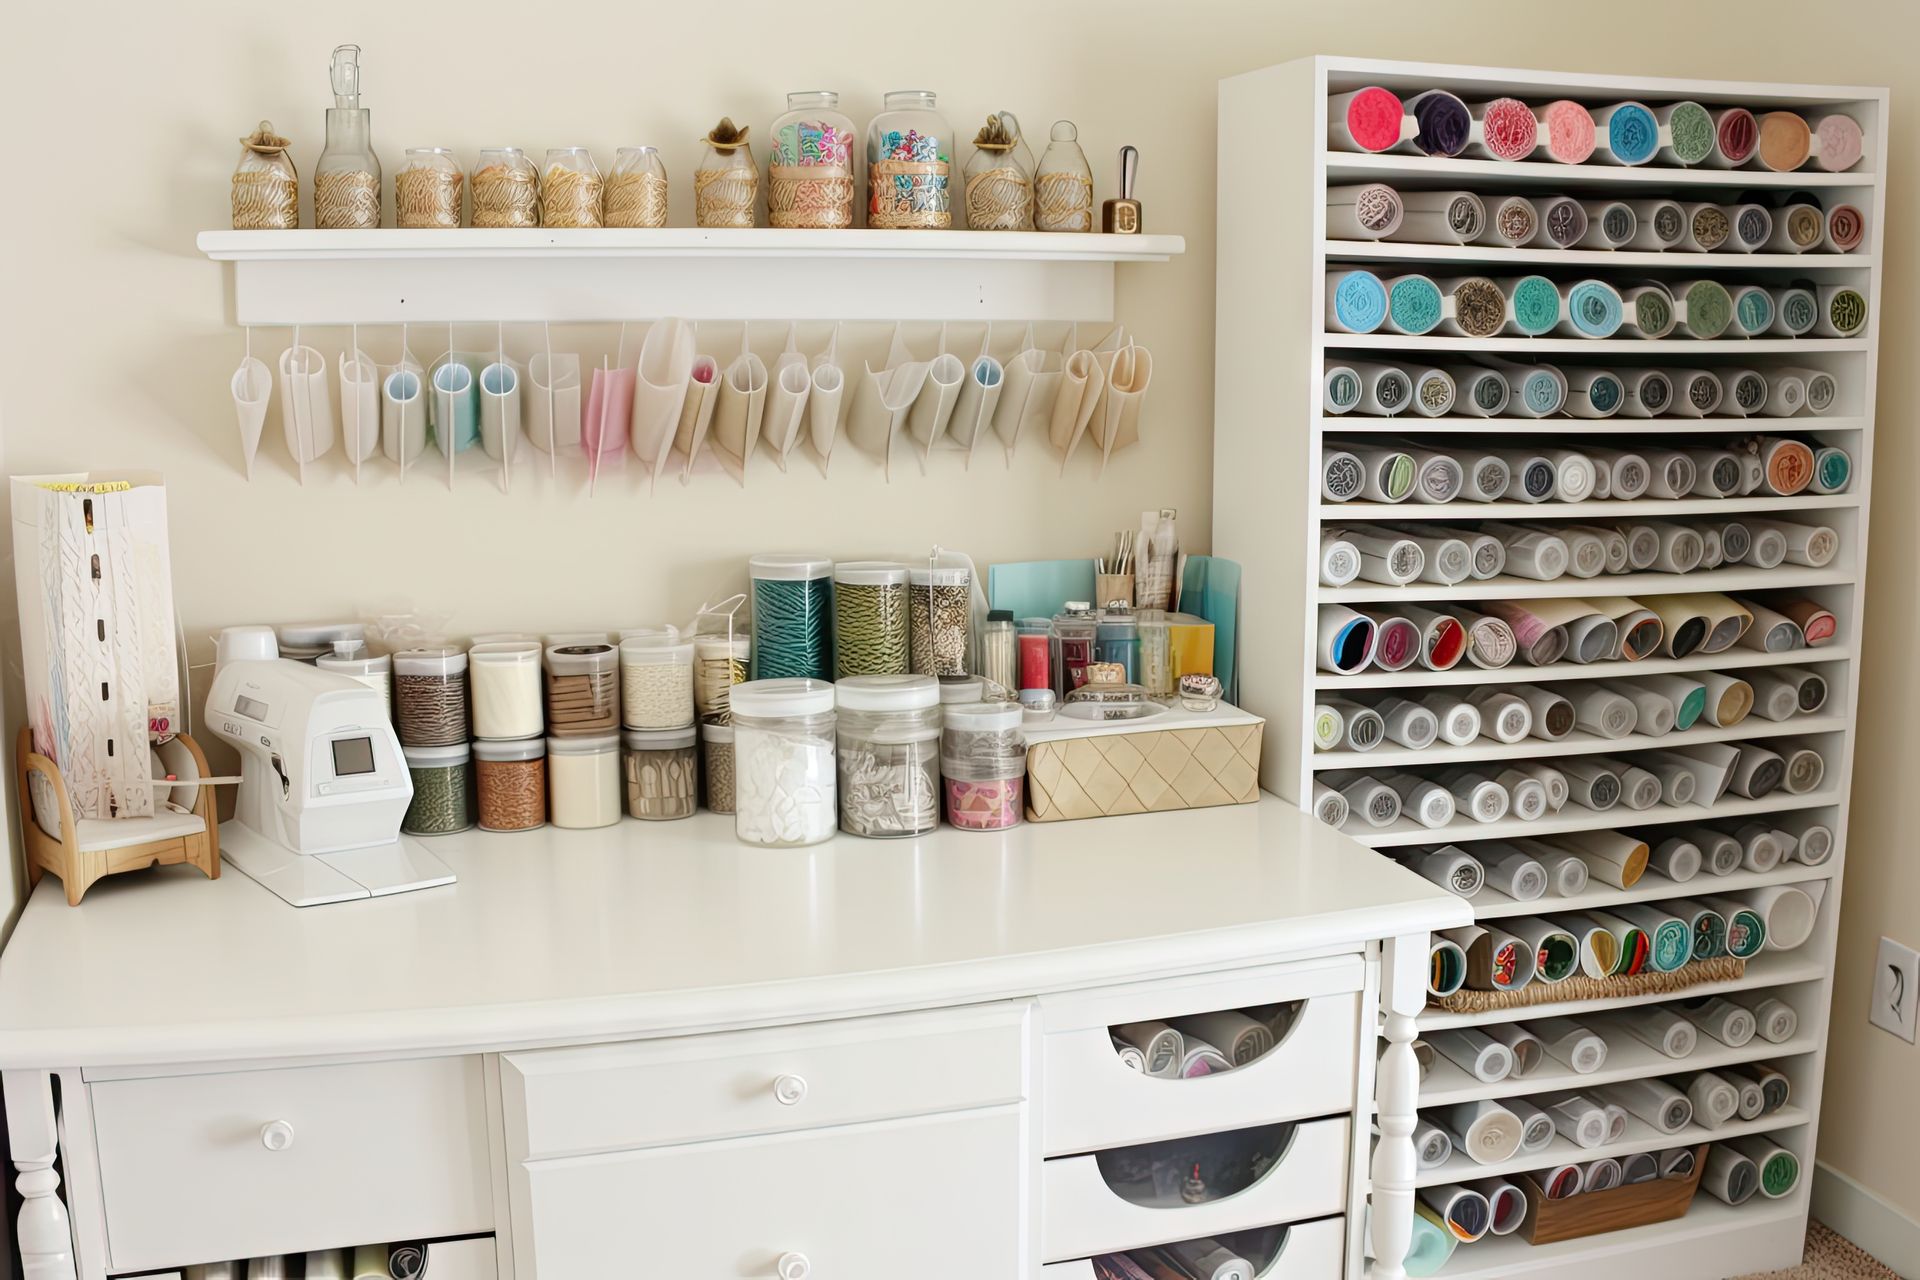 Custom drawers and shelves with sewing supplies in them